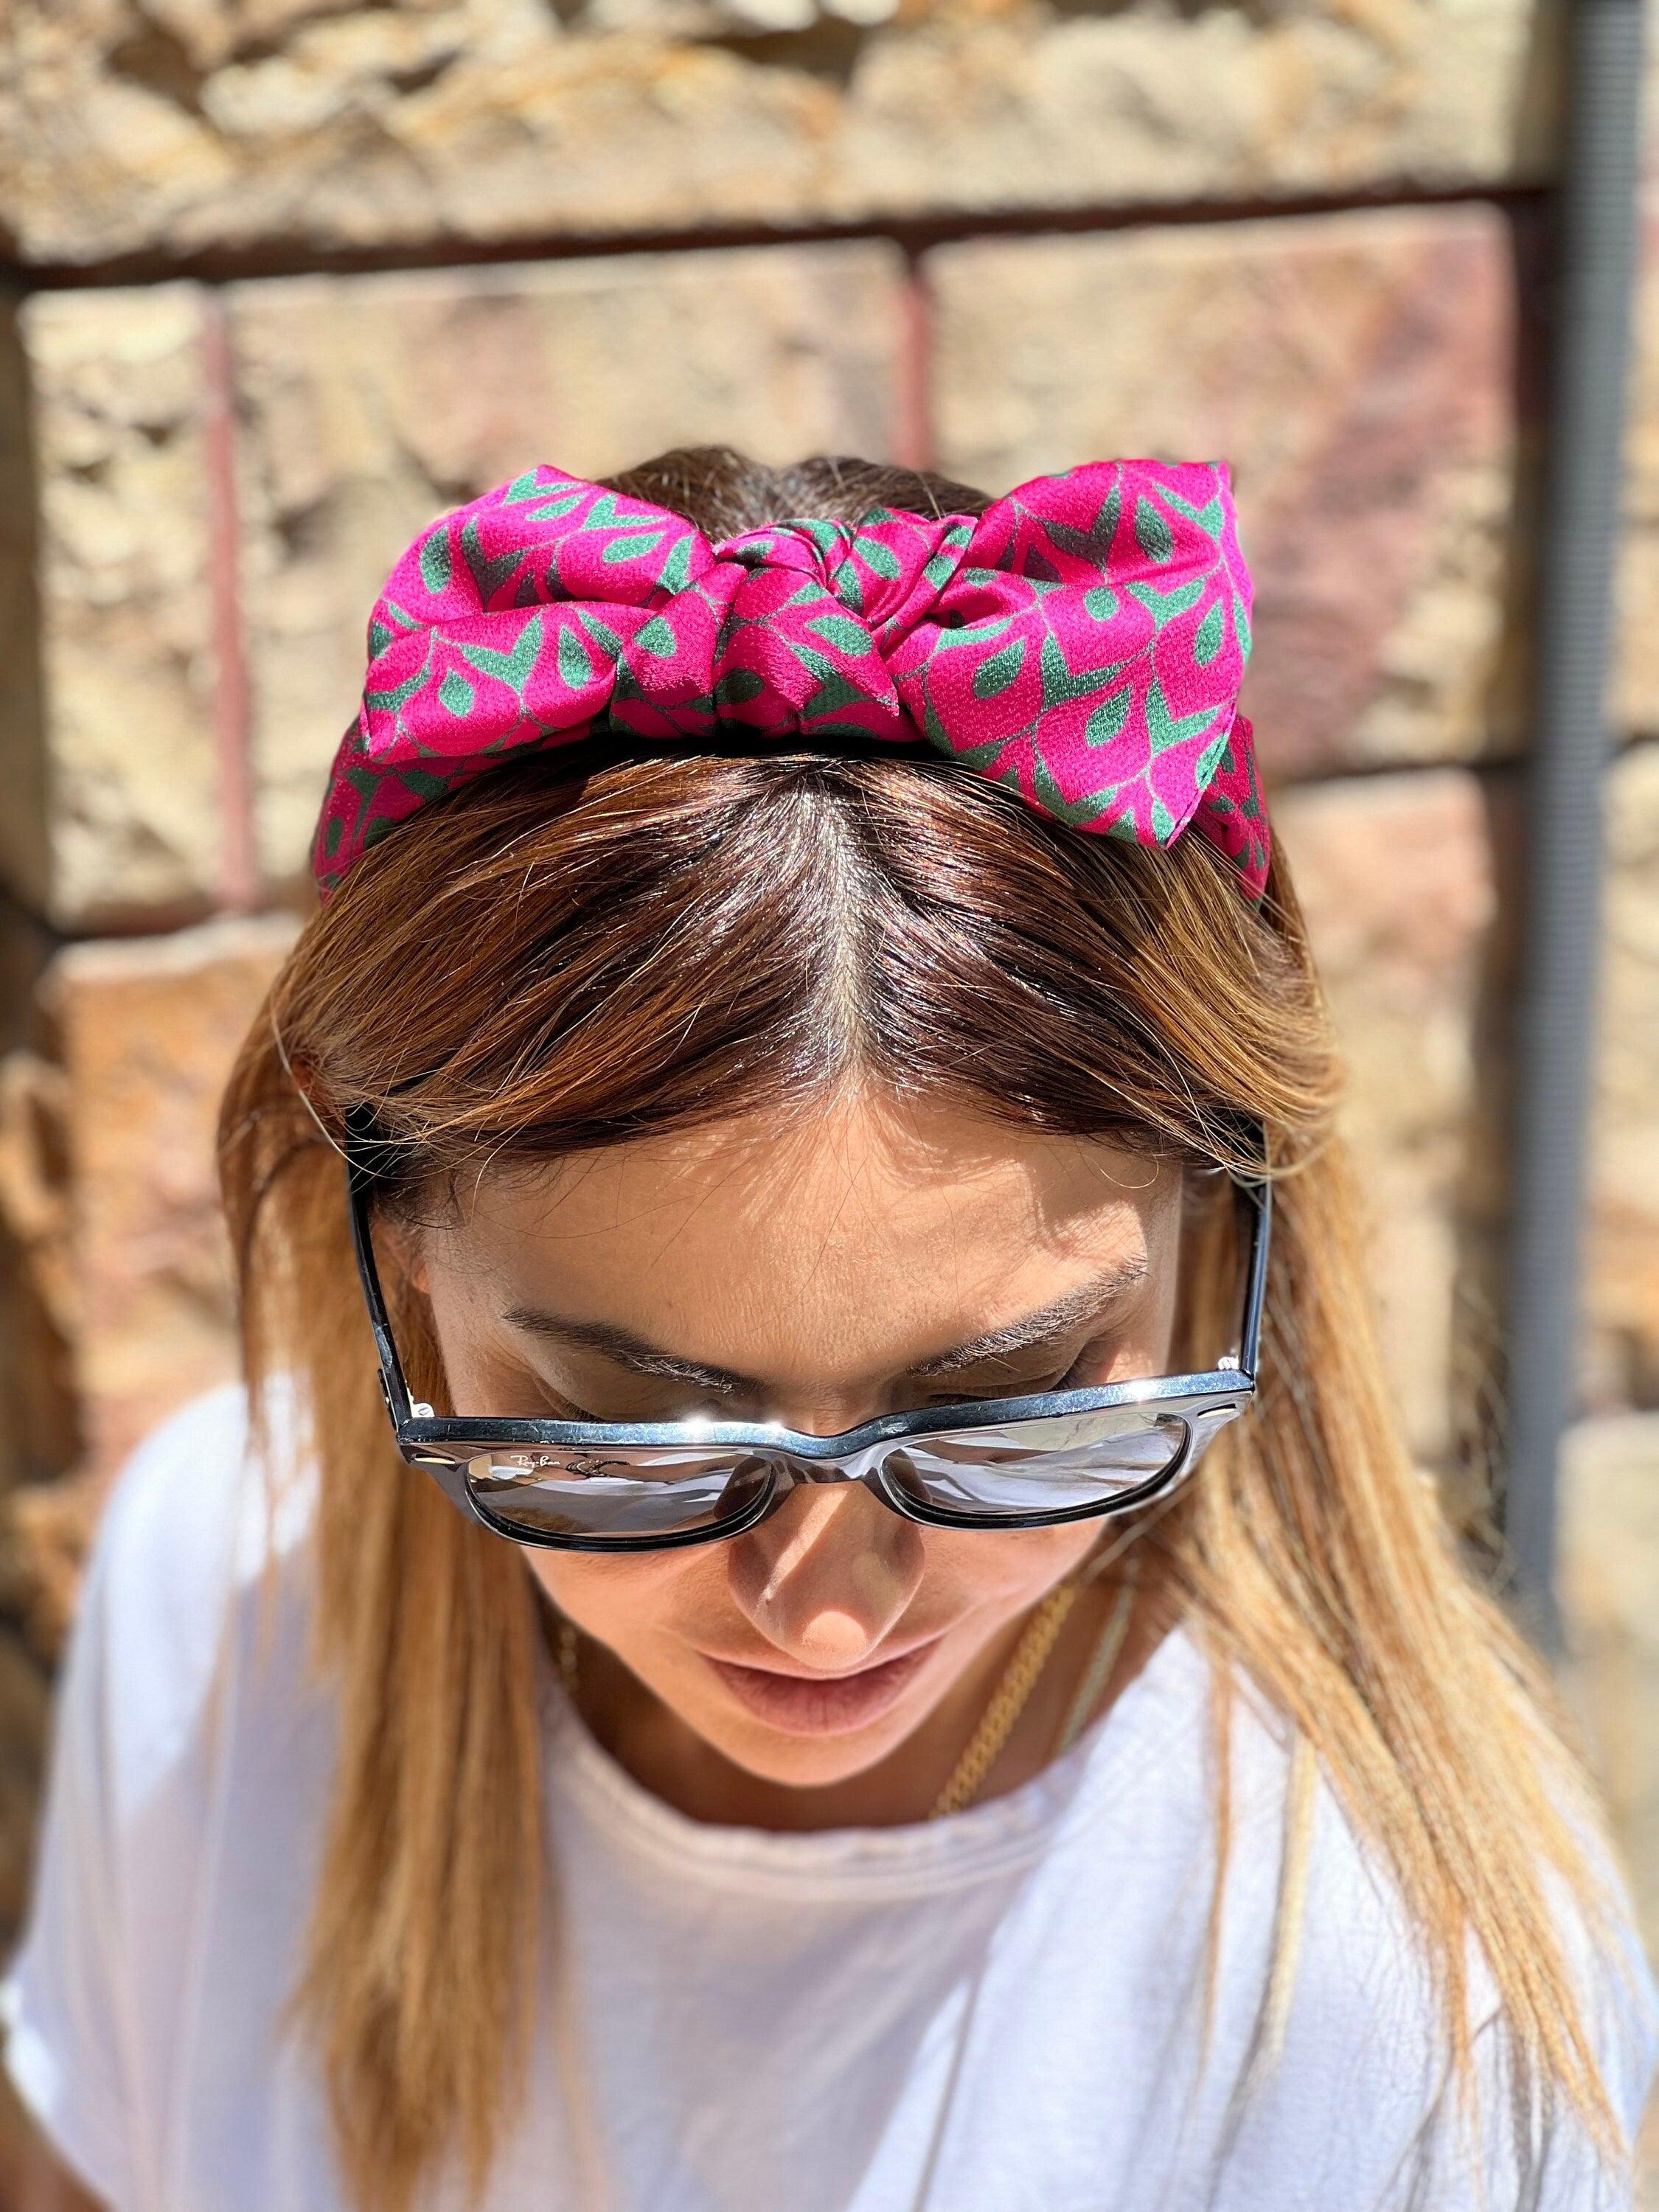 Elegant Silk Bow Headband in Pink and Green: Hair Tie for Women and Girls, Dark Pink Patterned Turban Hairband without Padding available at Moyoni Design